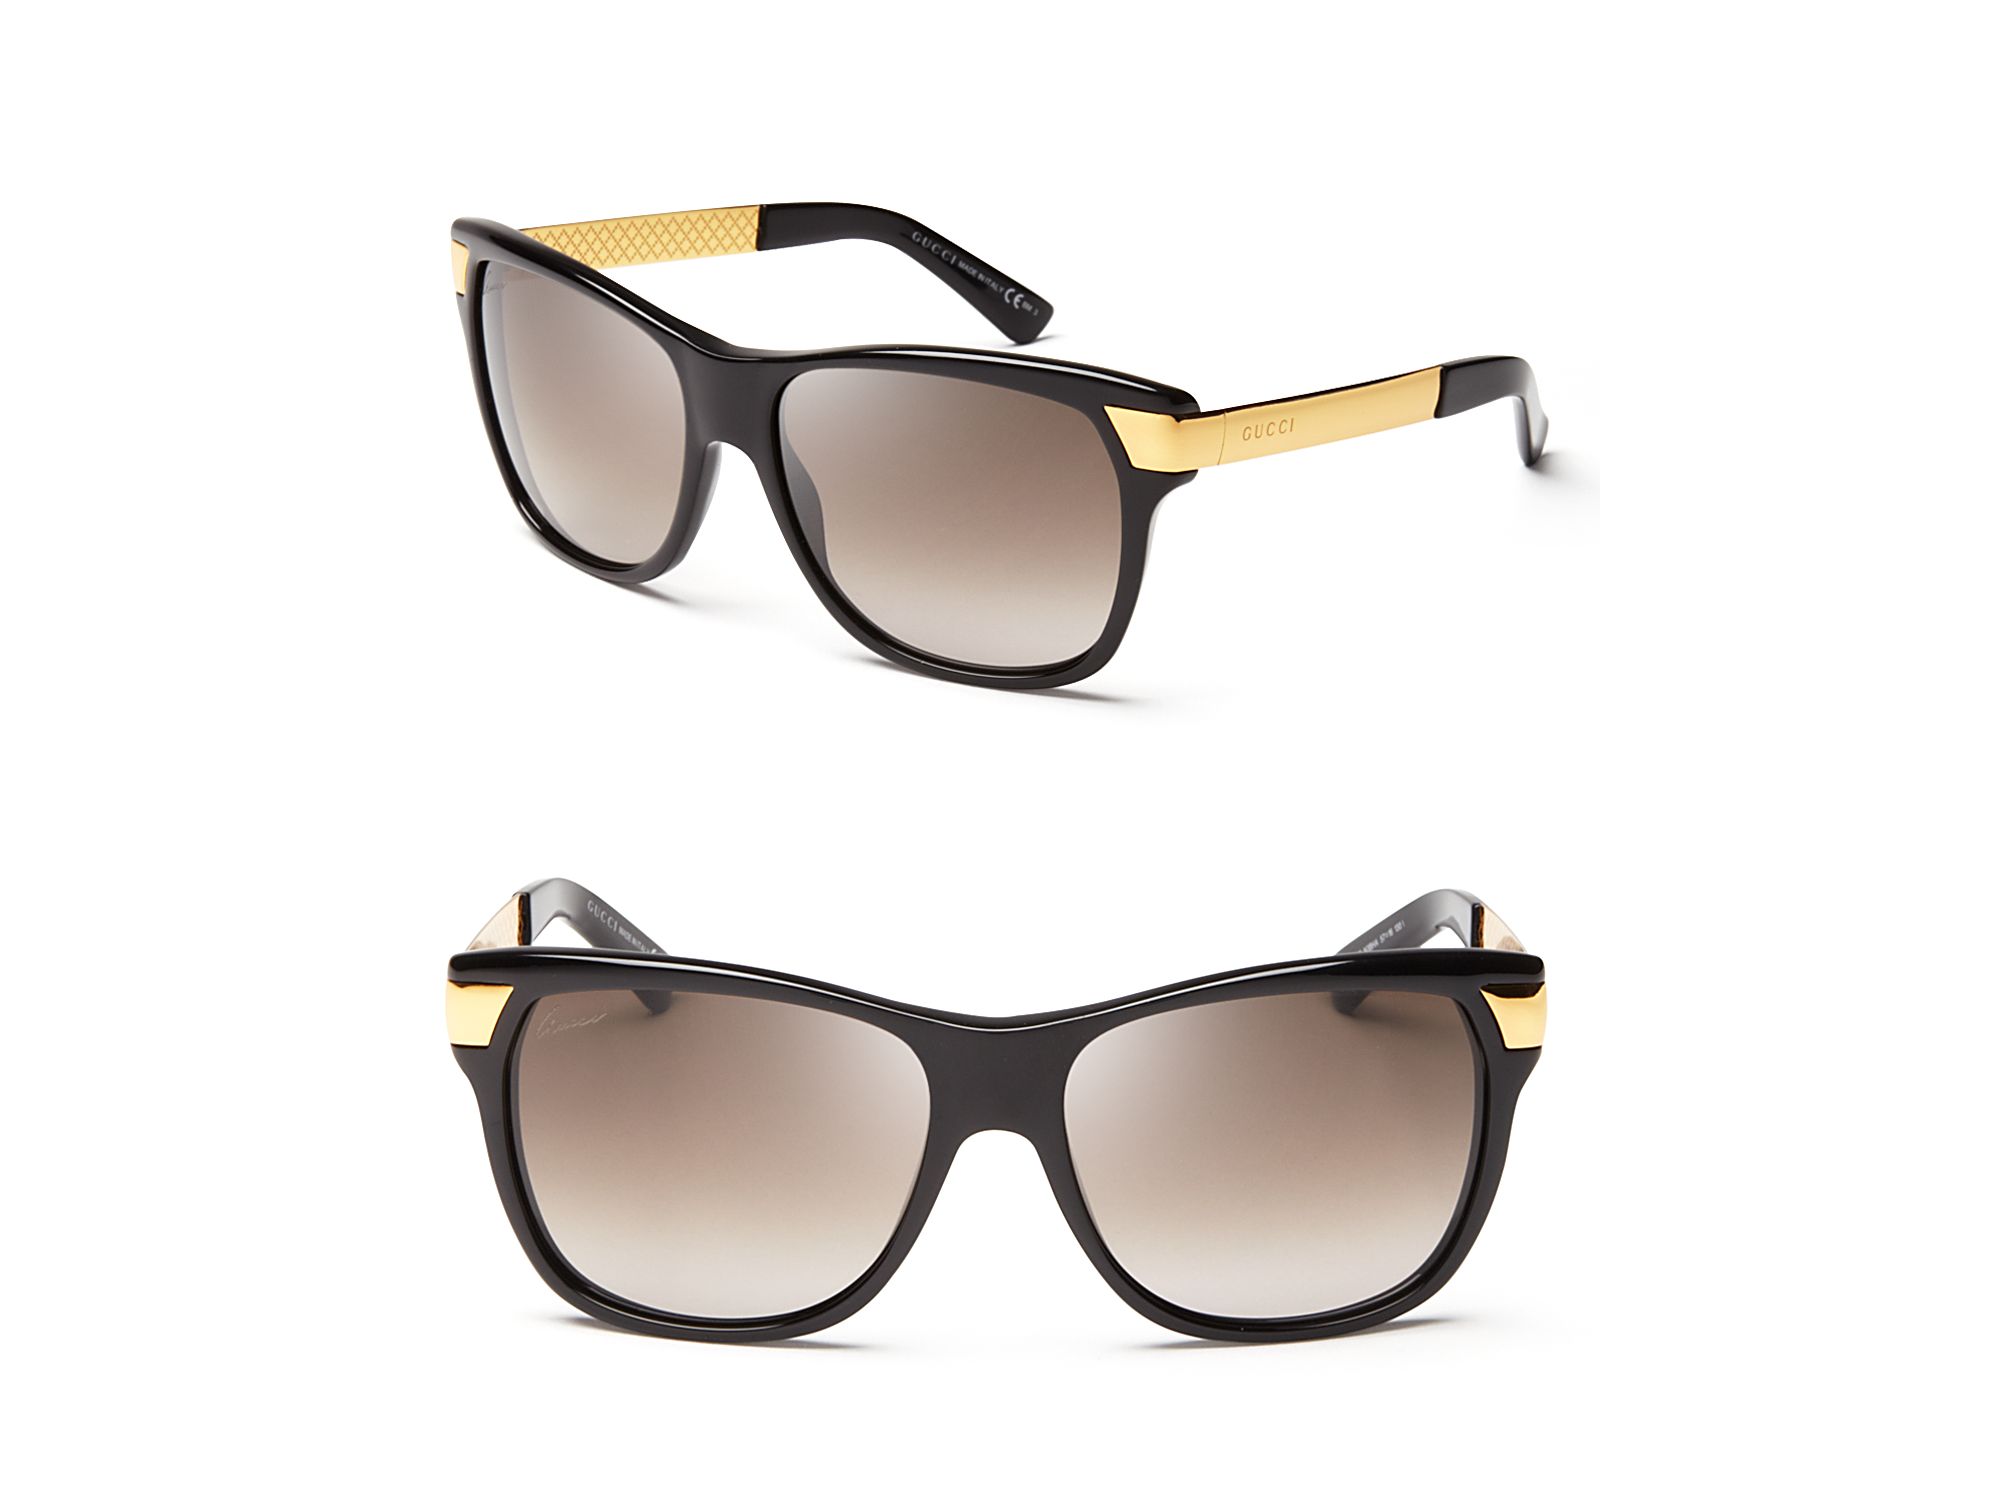 gucci sunglasses gold sides, OFF 73%,Buy!